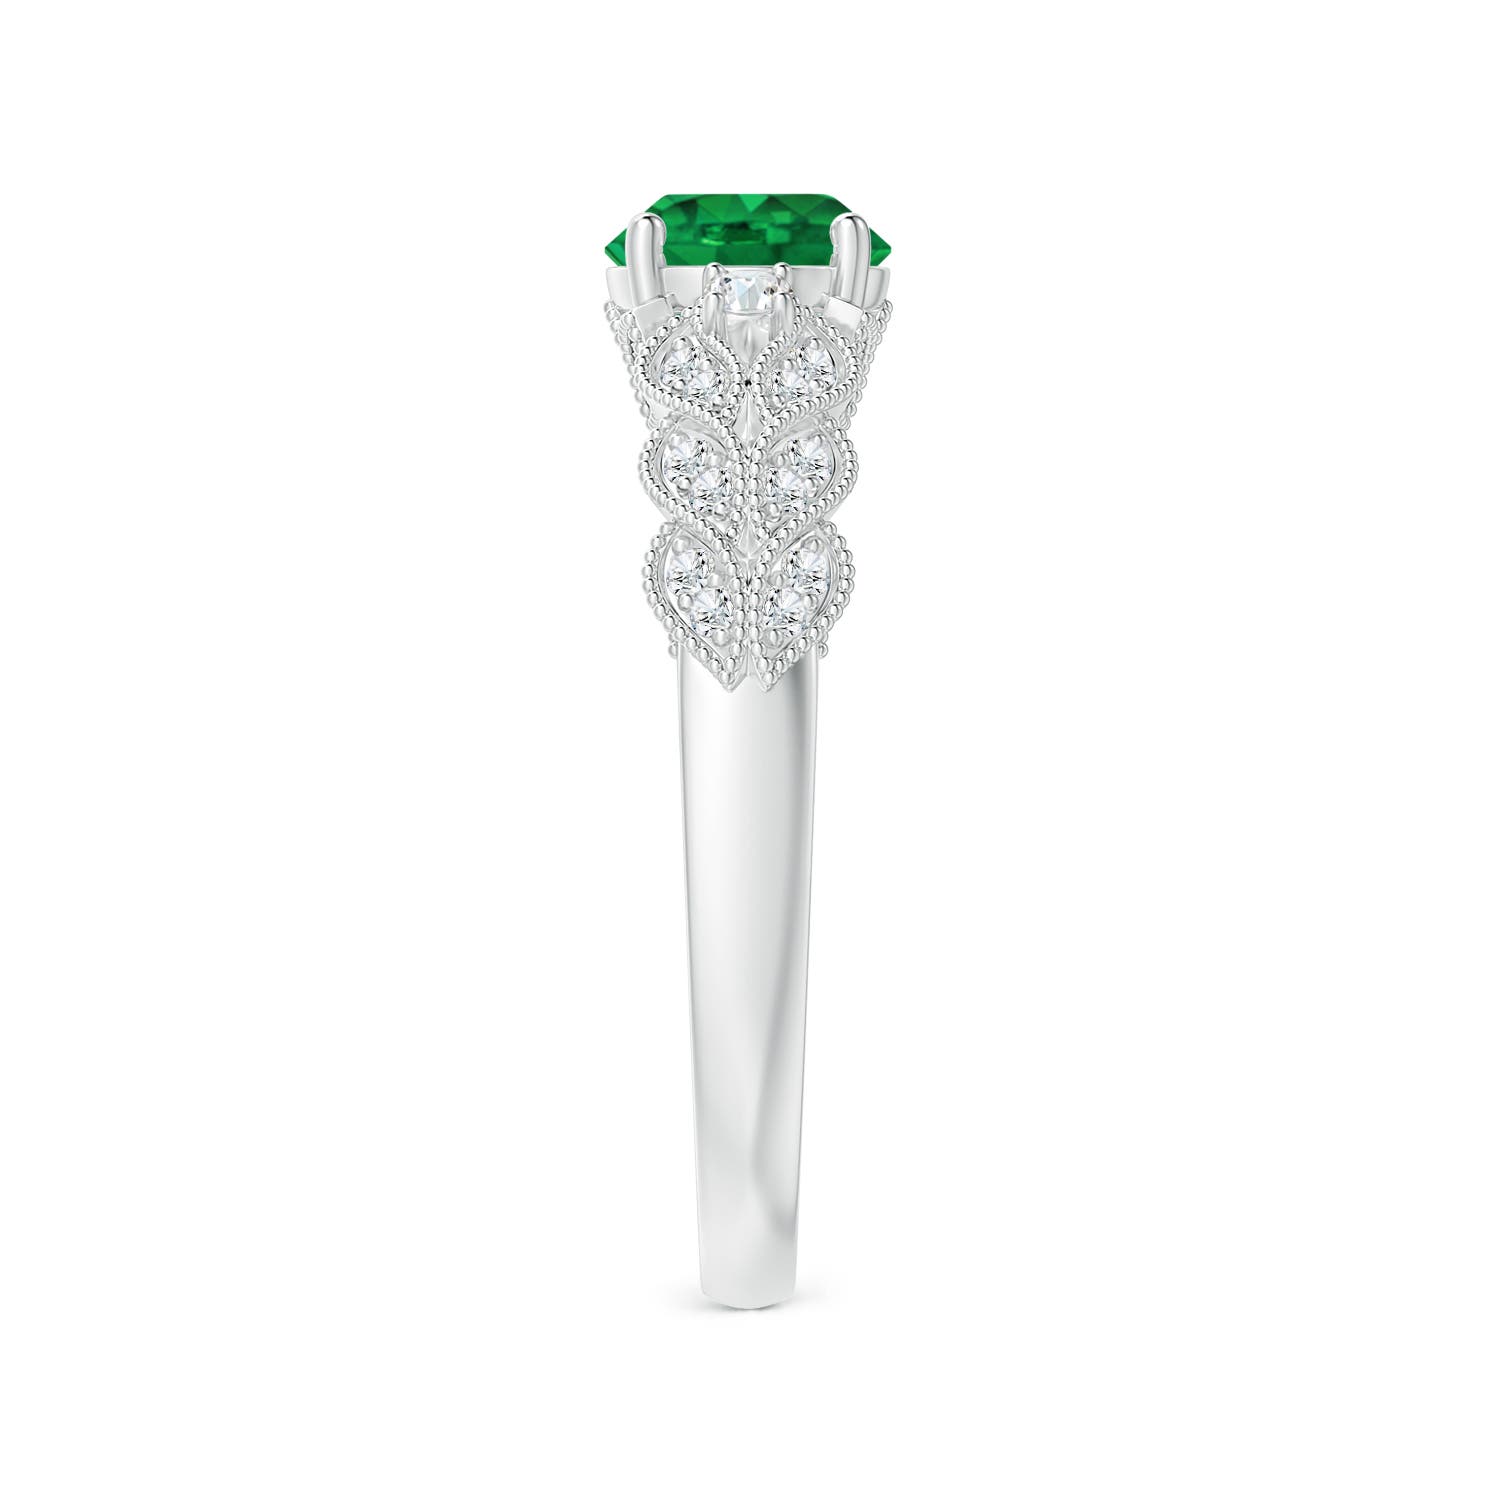 AAA - Emerald / 0.94 CT / 14 KT White Gold